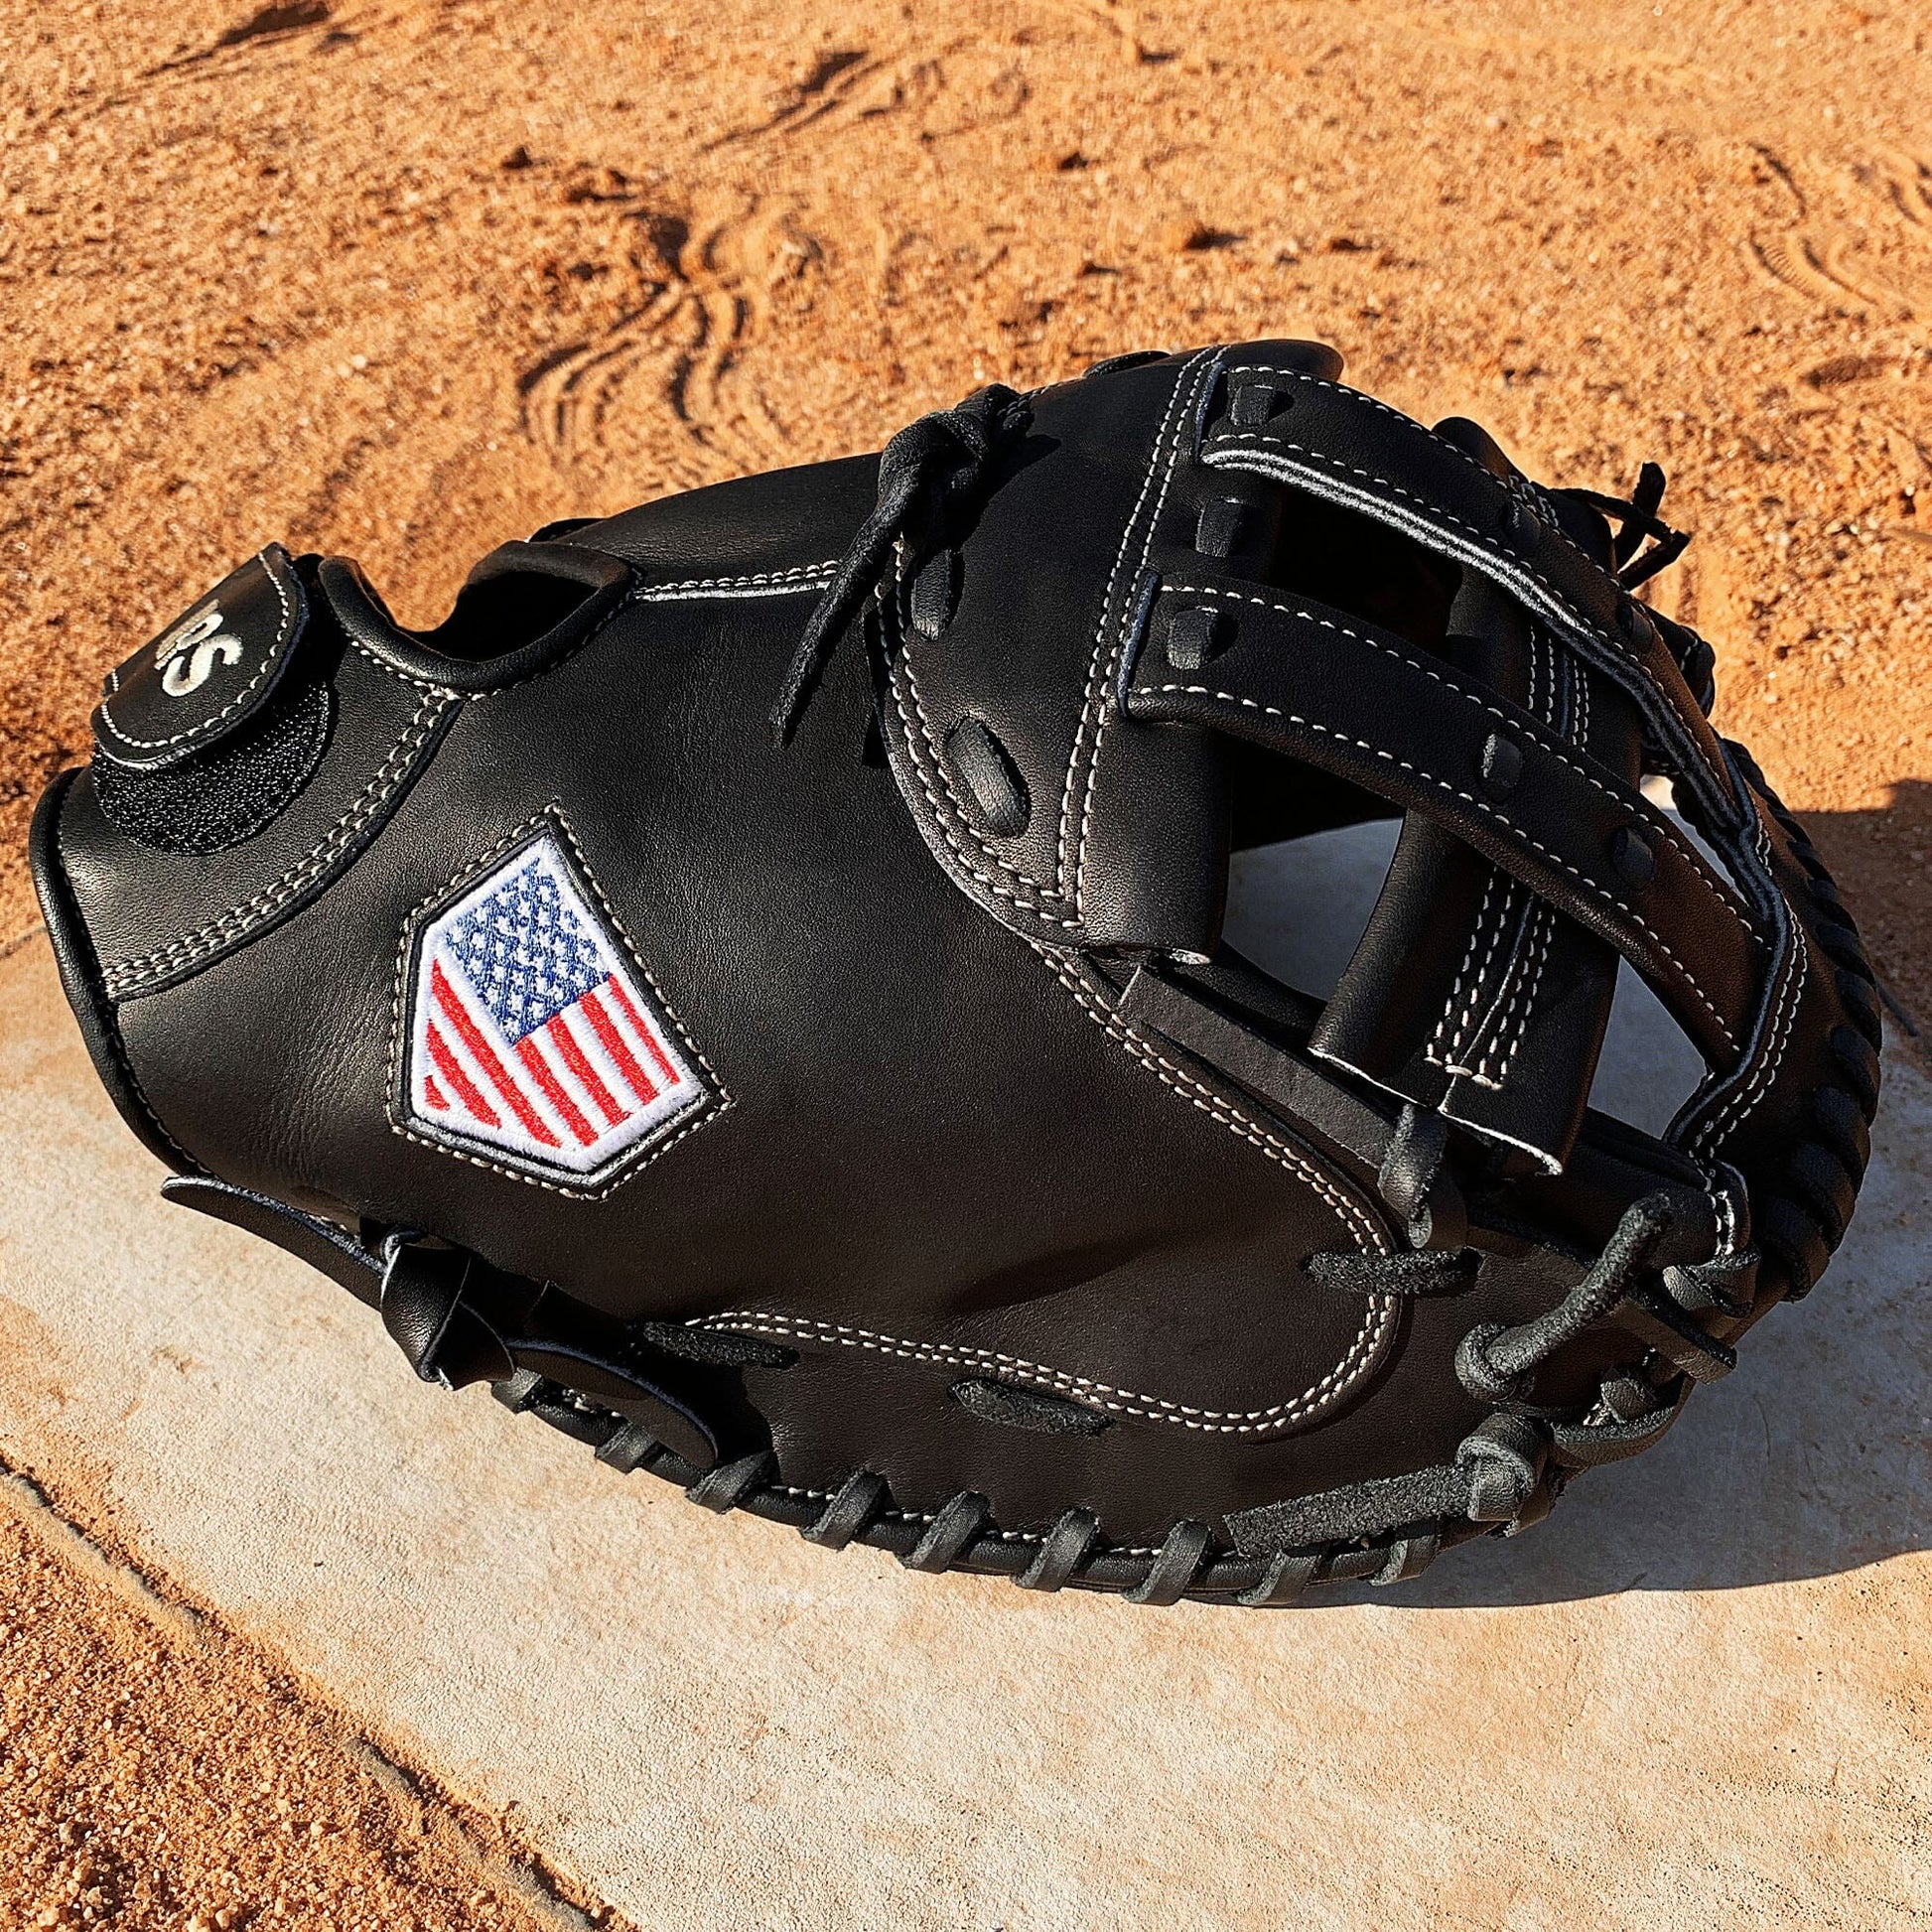 Top Quality Leather 34 inch Softball Catcher's Mitt: Hit Run Steal